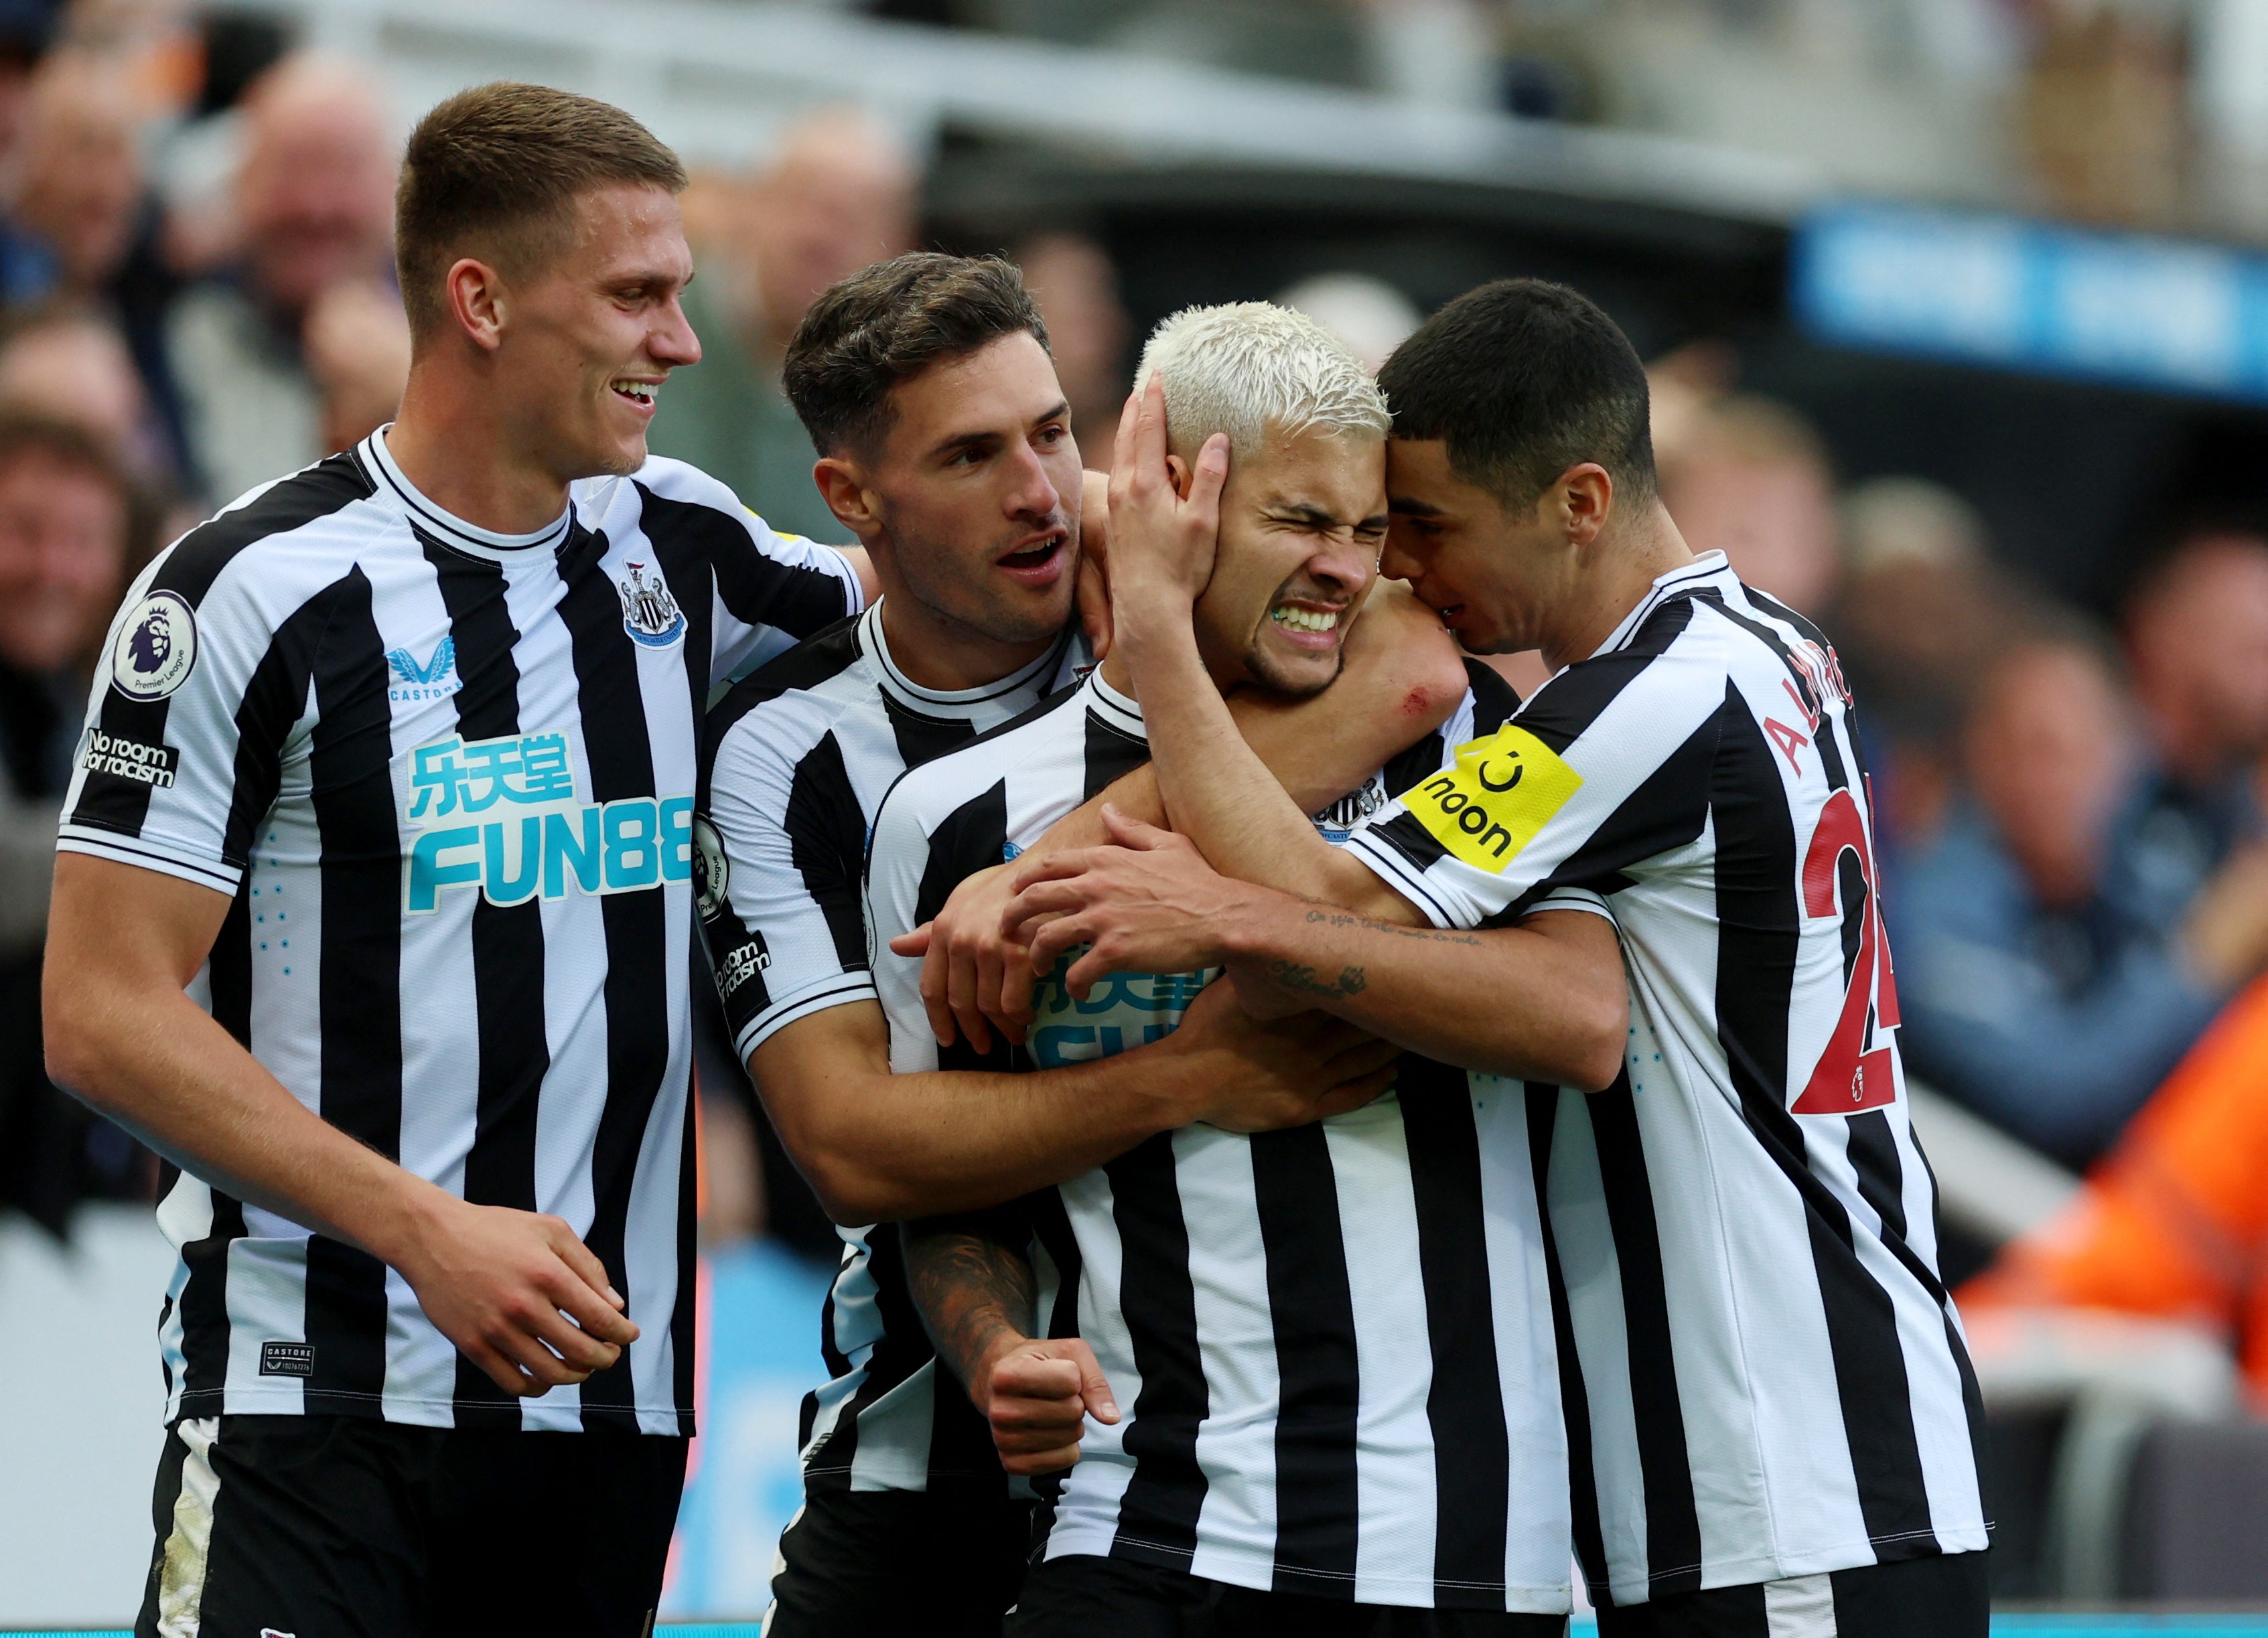 newcastle match live today